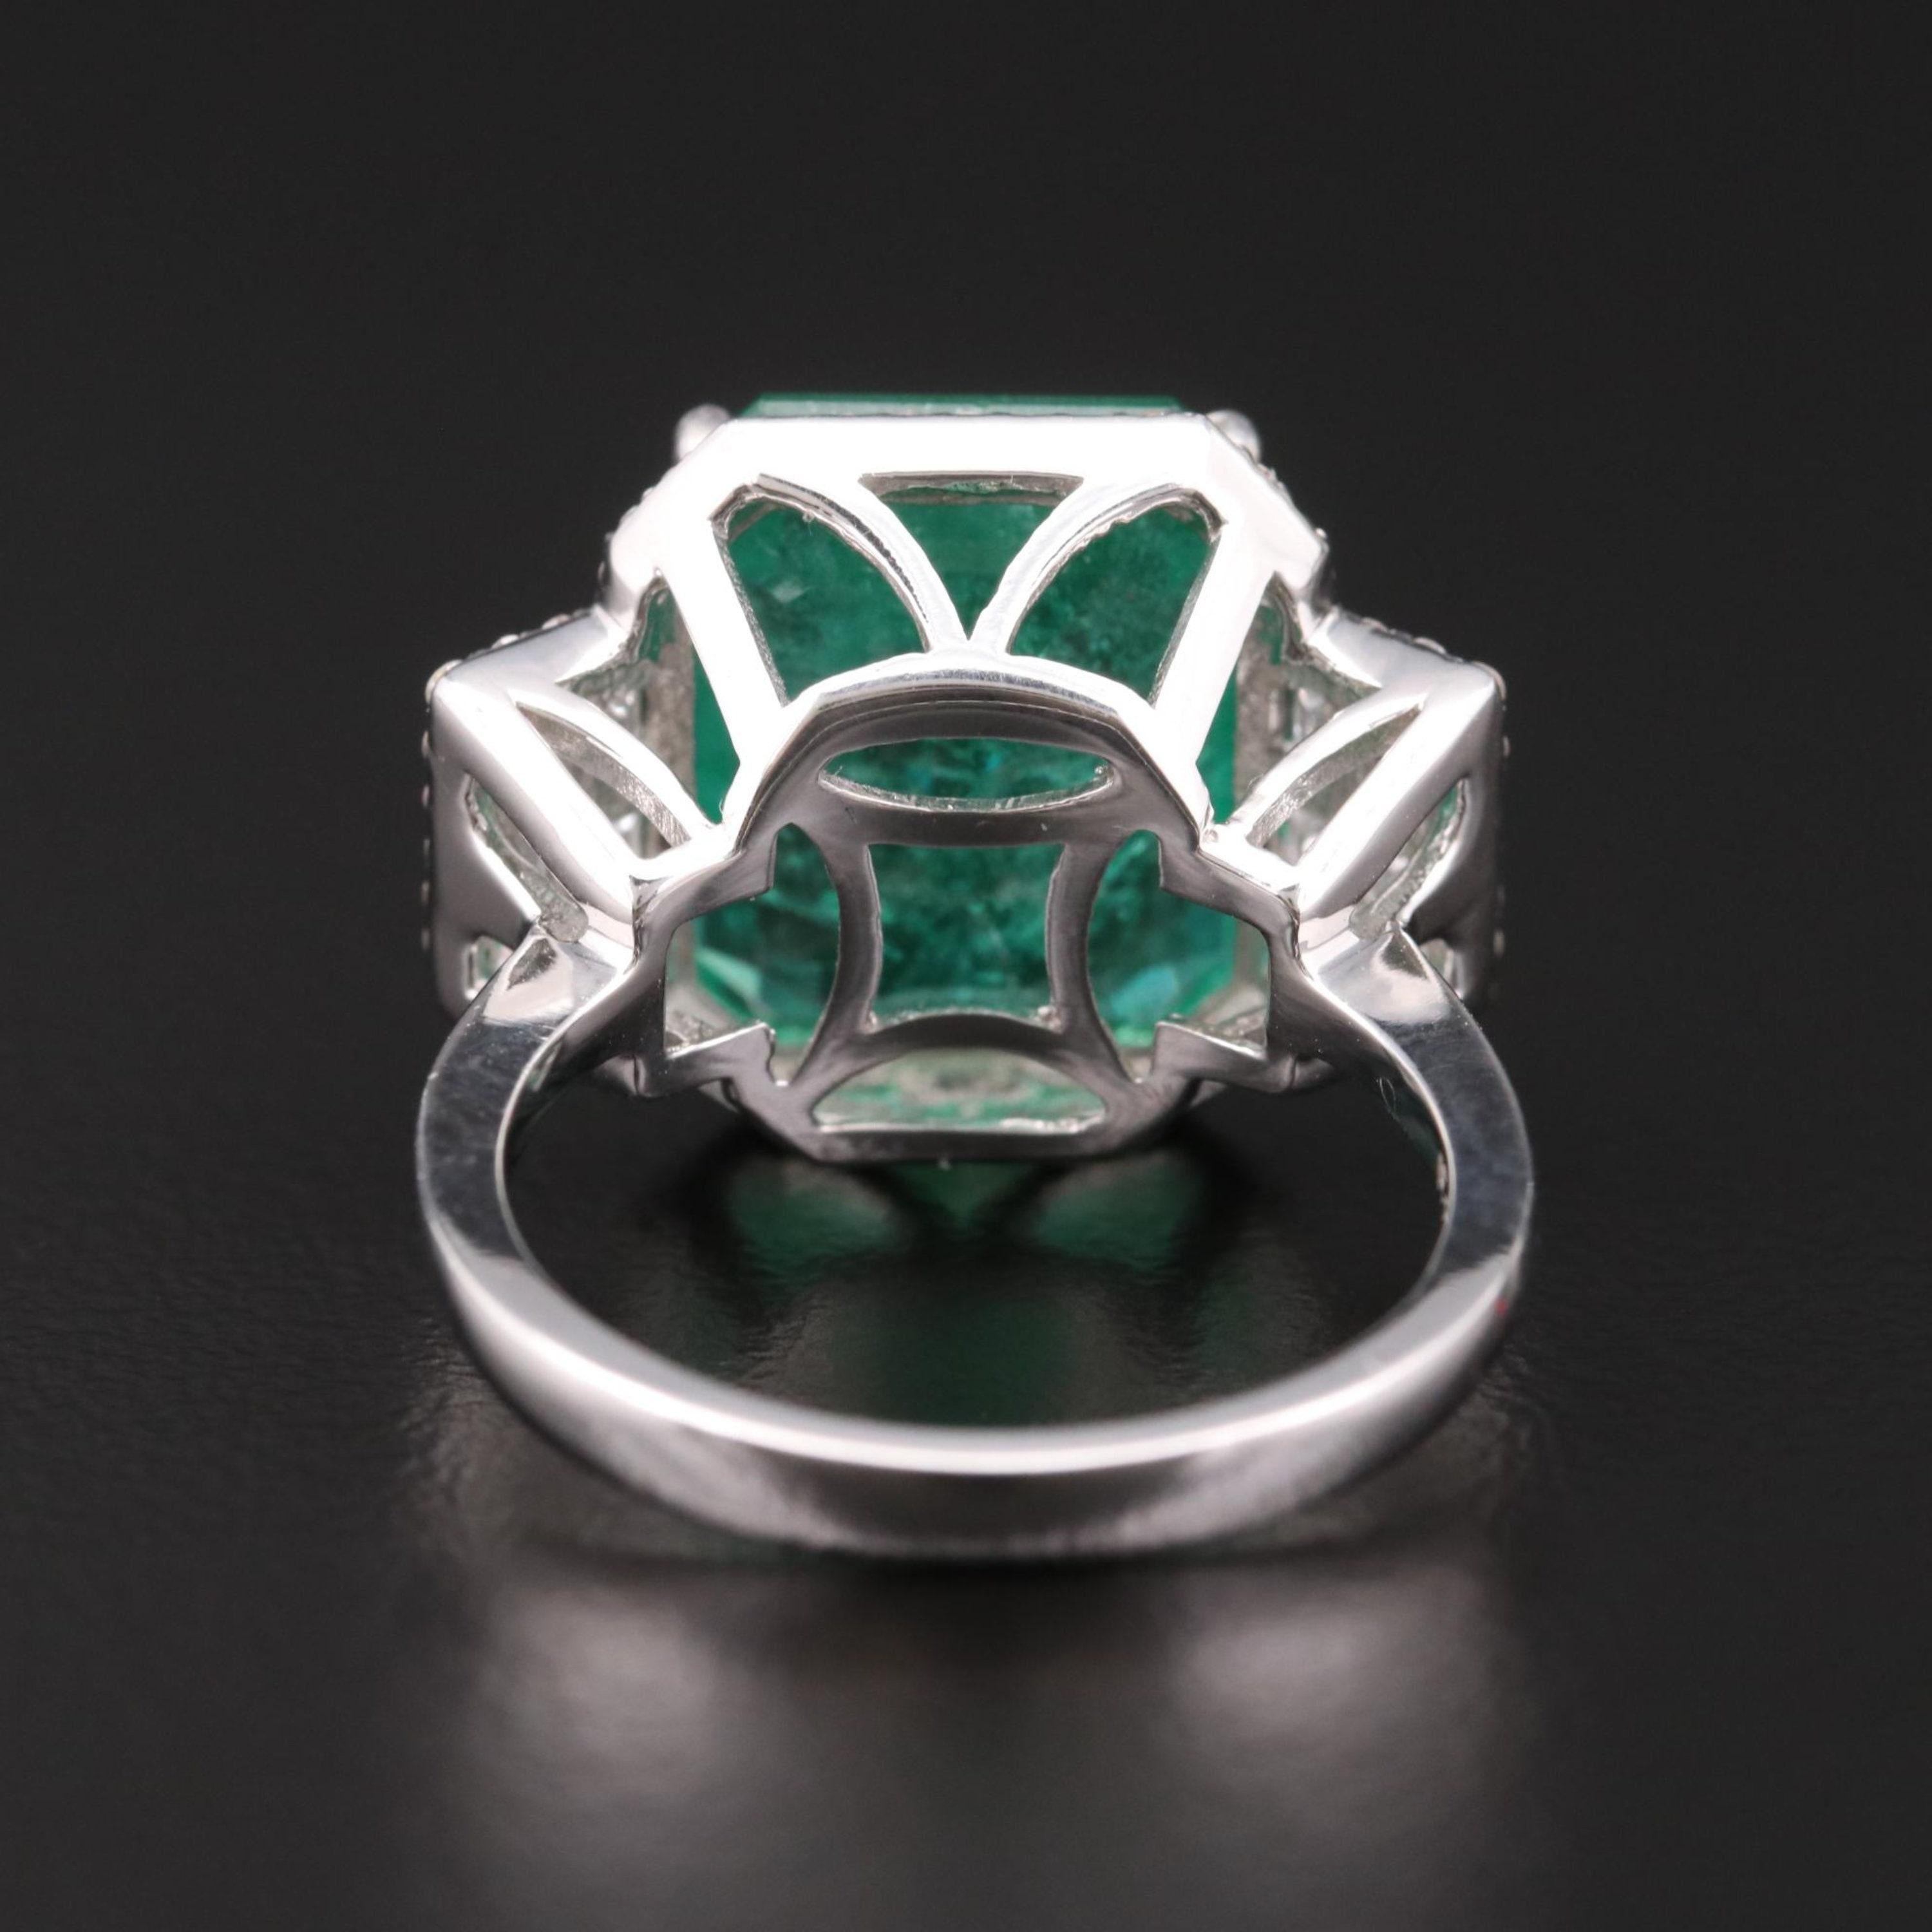 For Sale:  Art Deco 7 Carat Natural Emerald Diamond White Gold Engagement Ring Wedding Ring 6